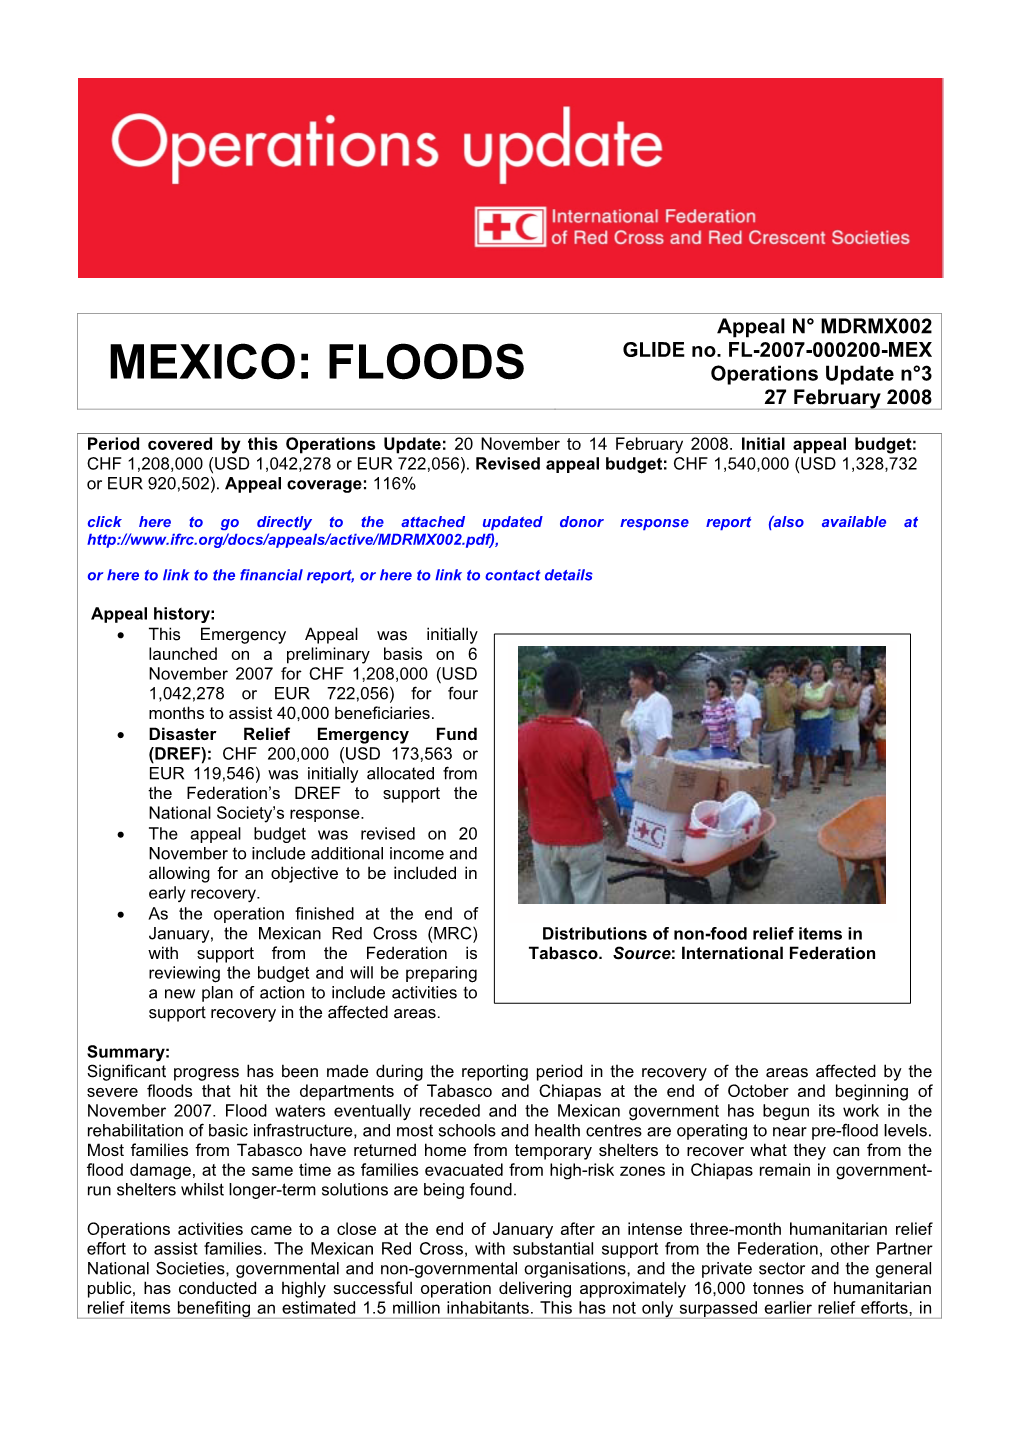 MEXICO: FLOODS Operations Update N°3 27 February 2008